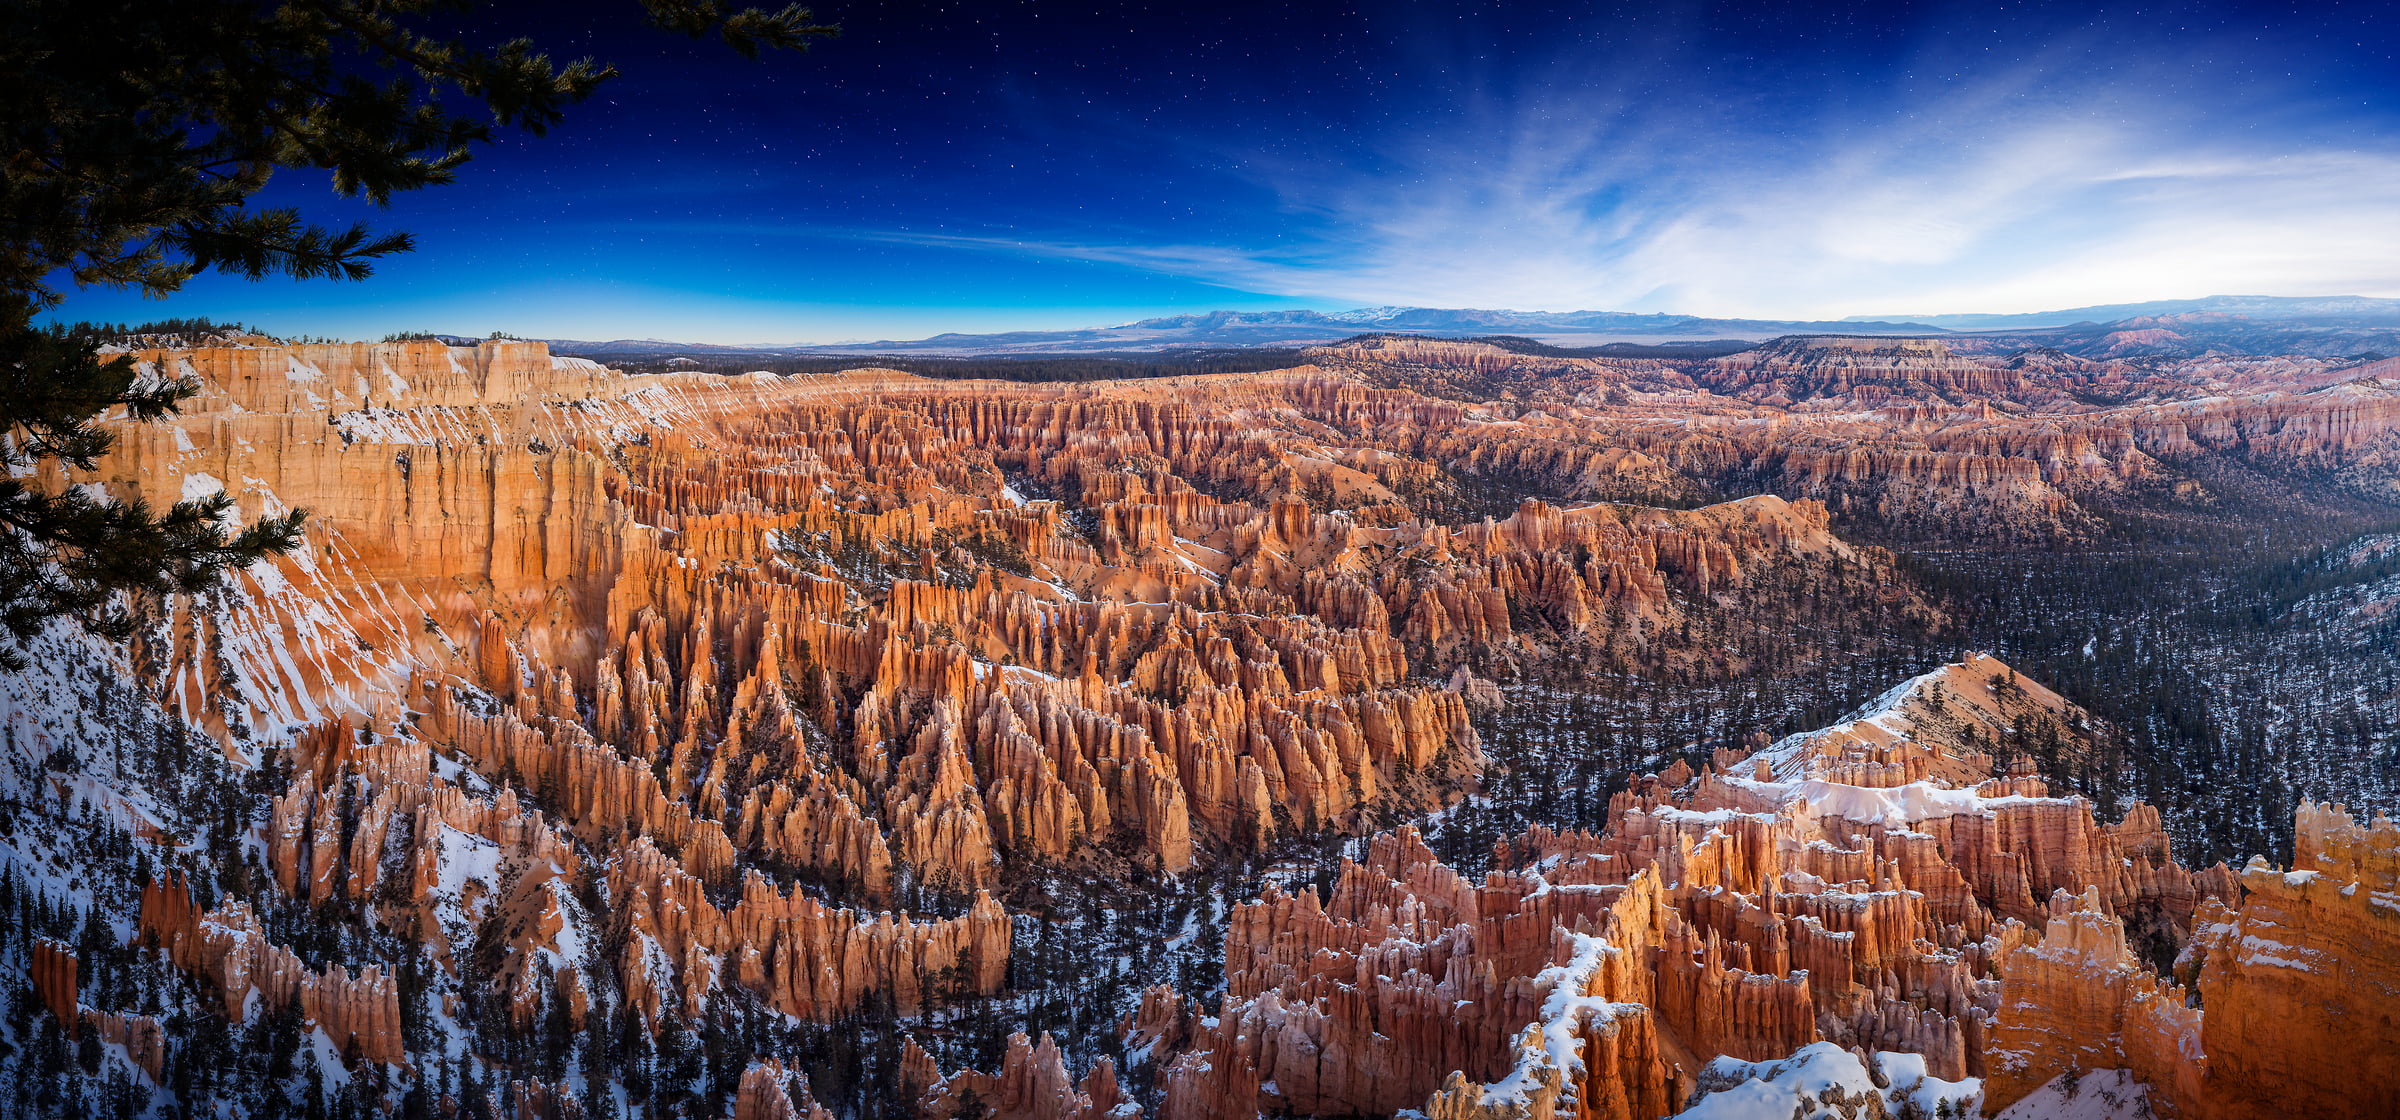 236 megapixels! A very high resolution, large-format VAST photo of Bryce Canyon; fine art landscape photograph created by Nick Pedersen in Bryce Canyon National Park, Utah.